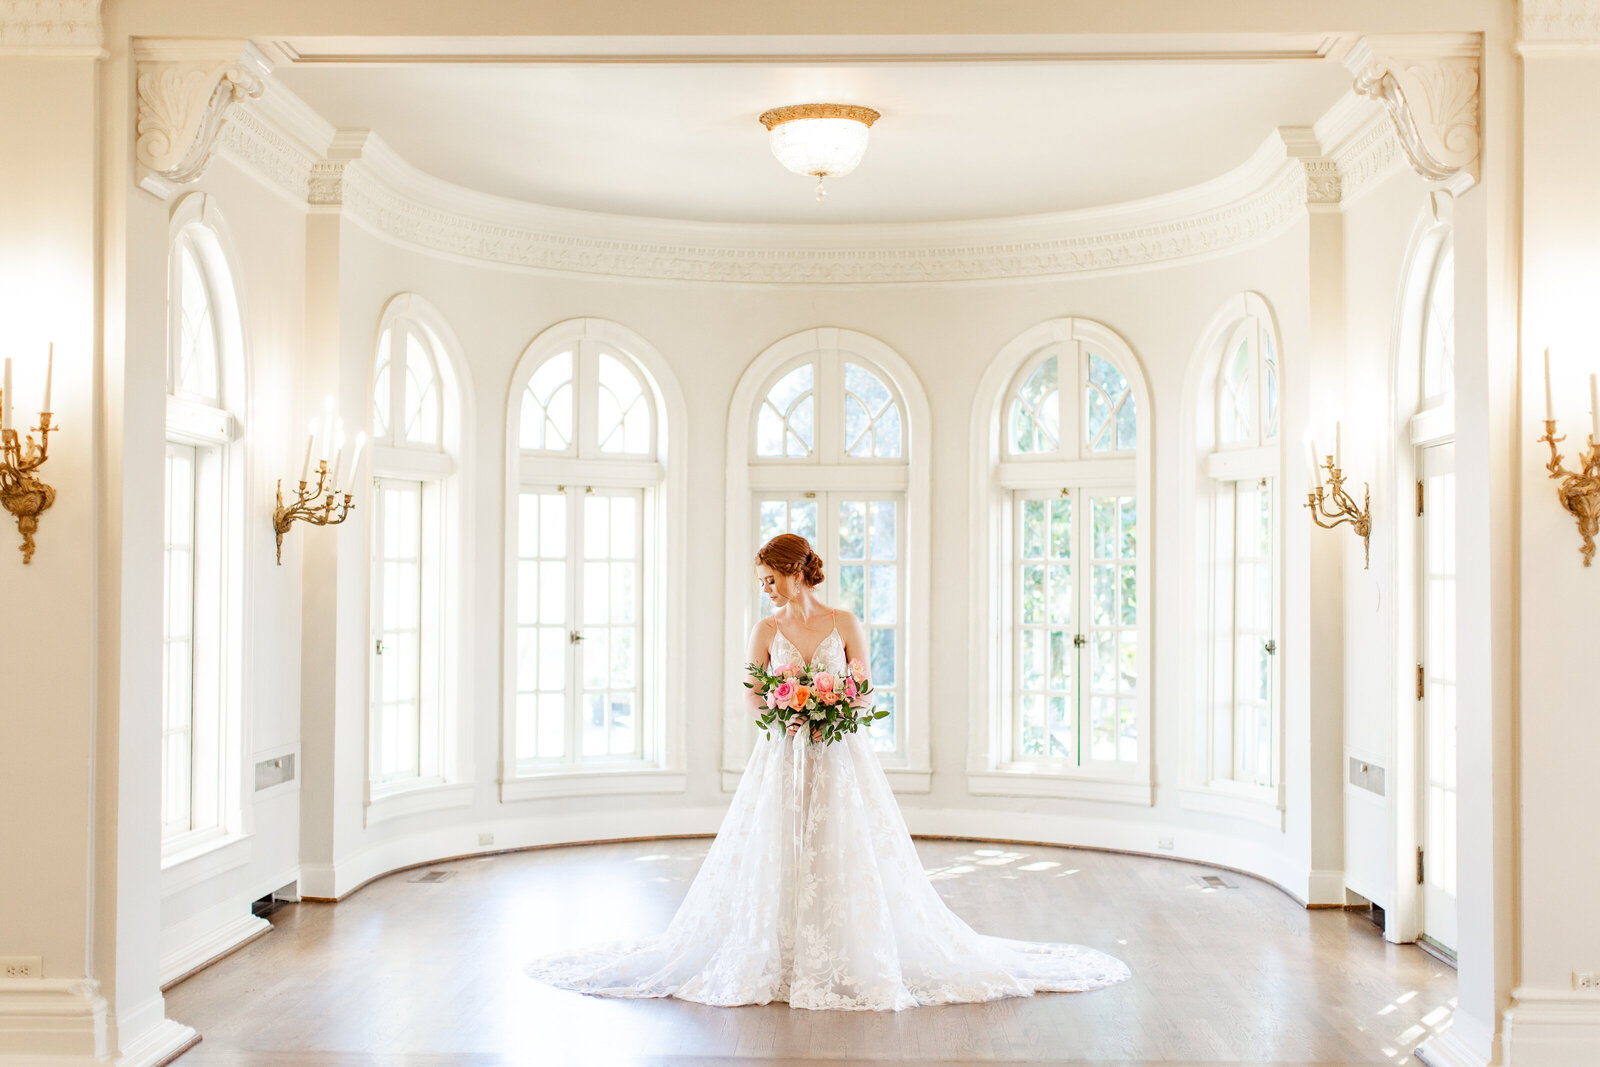 Bride standing in the rotunda room at The Mansion at Woodward Park in her Ellis bridal wedding dress.